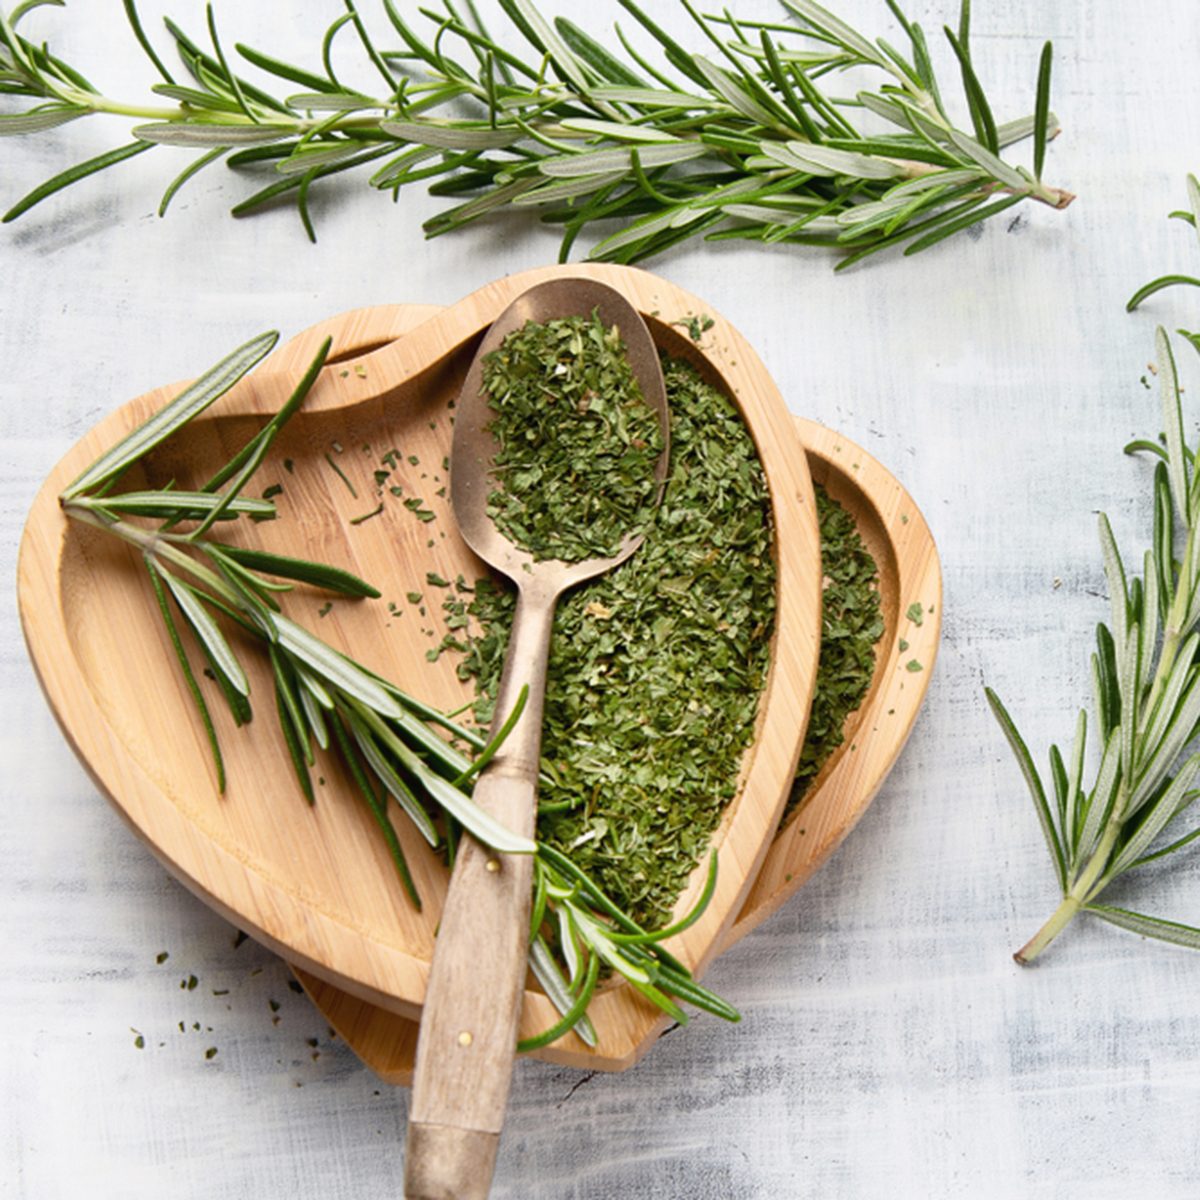 About Rosemary and Its Use in Cooking